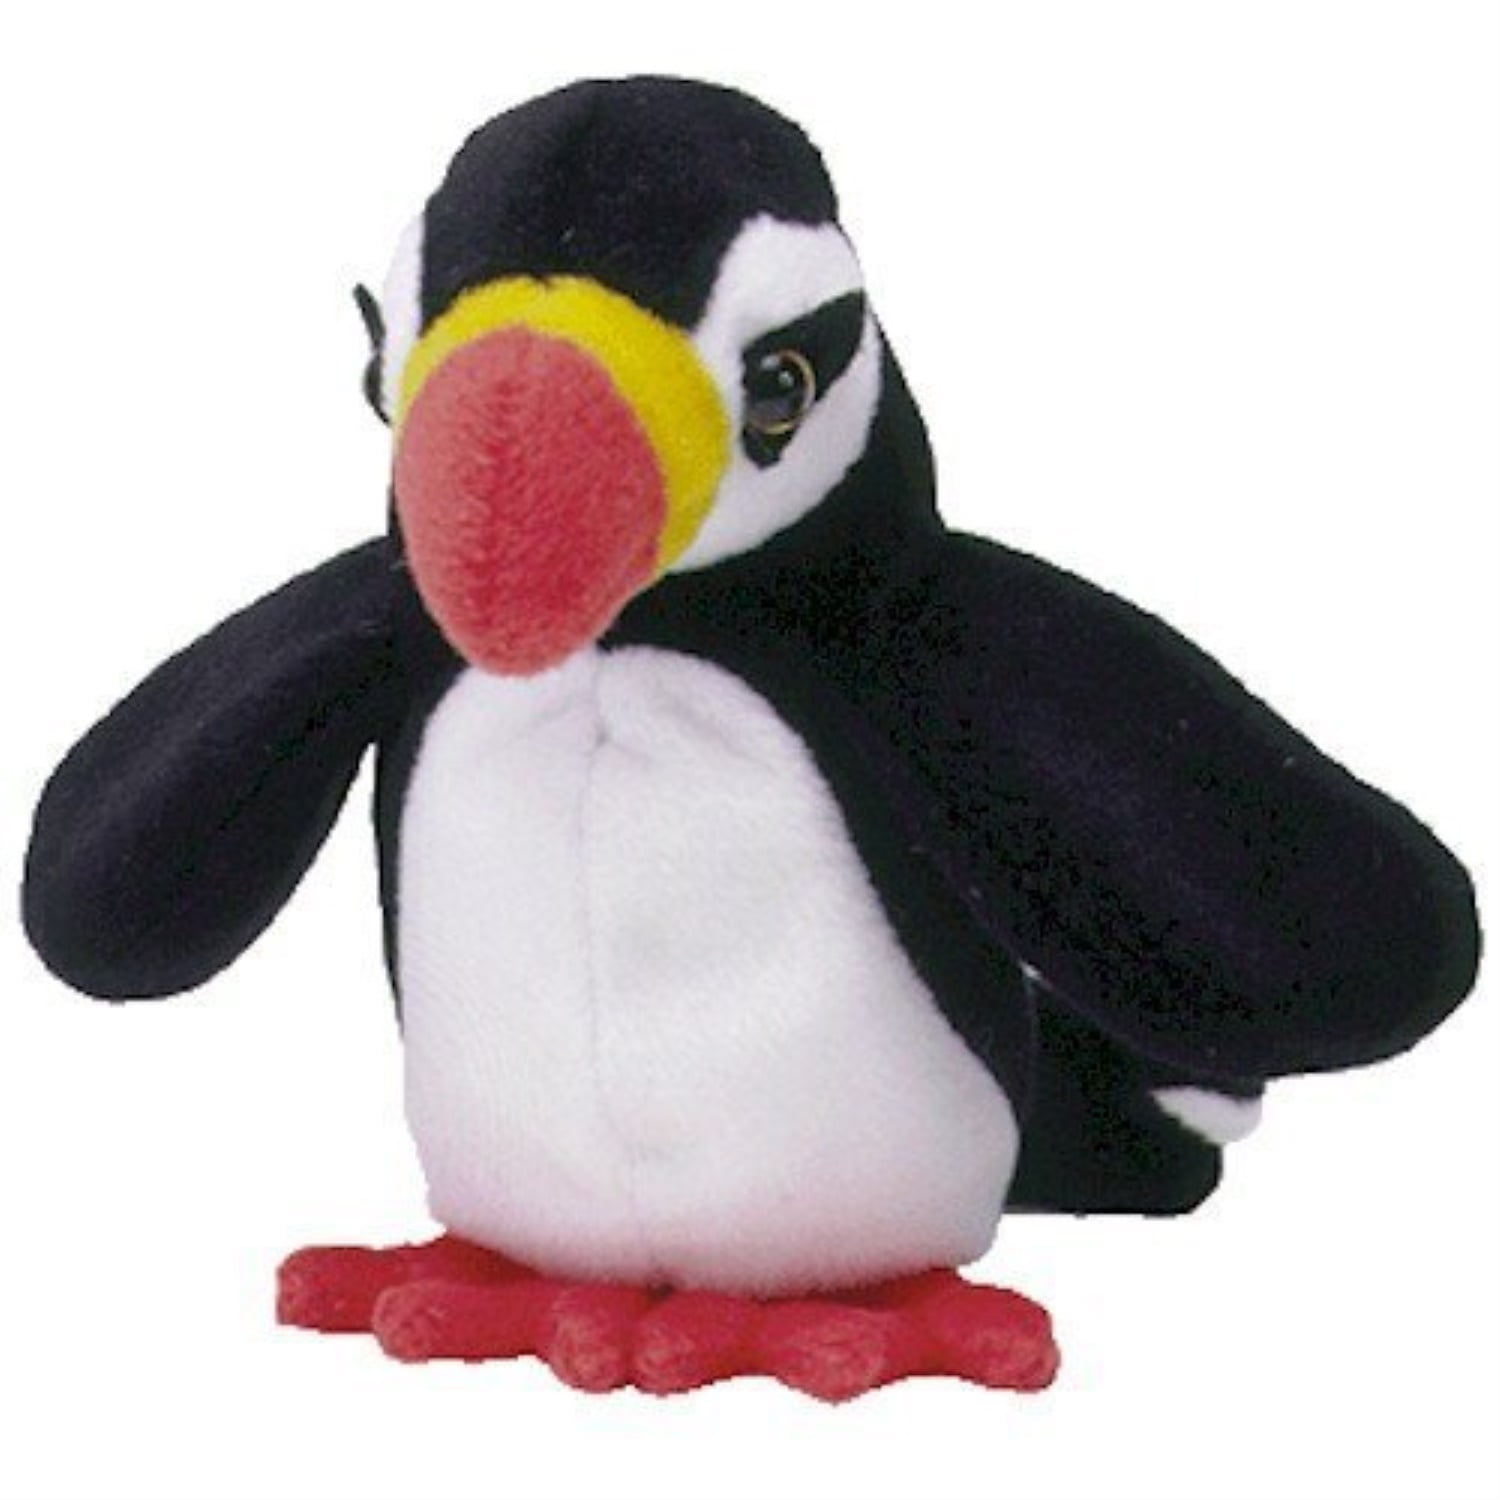 Ty Beanie Baby Puffer The Puffin 1997 Plush 7 Inch MINT Stuffed Animal 195c for sale online 